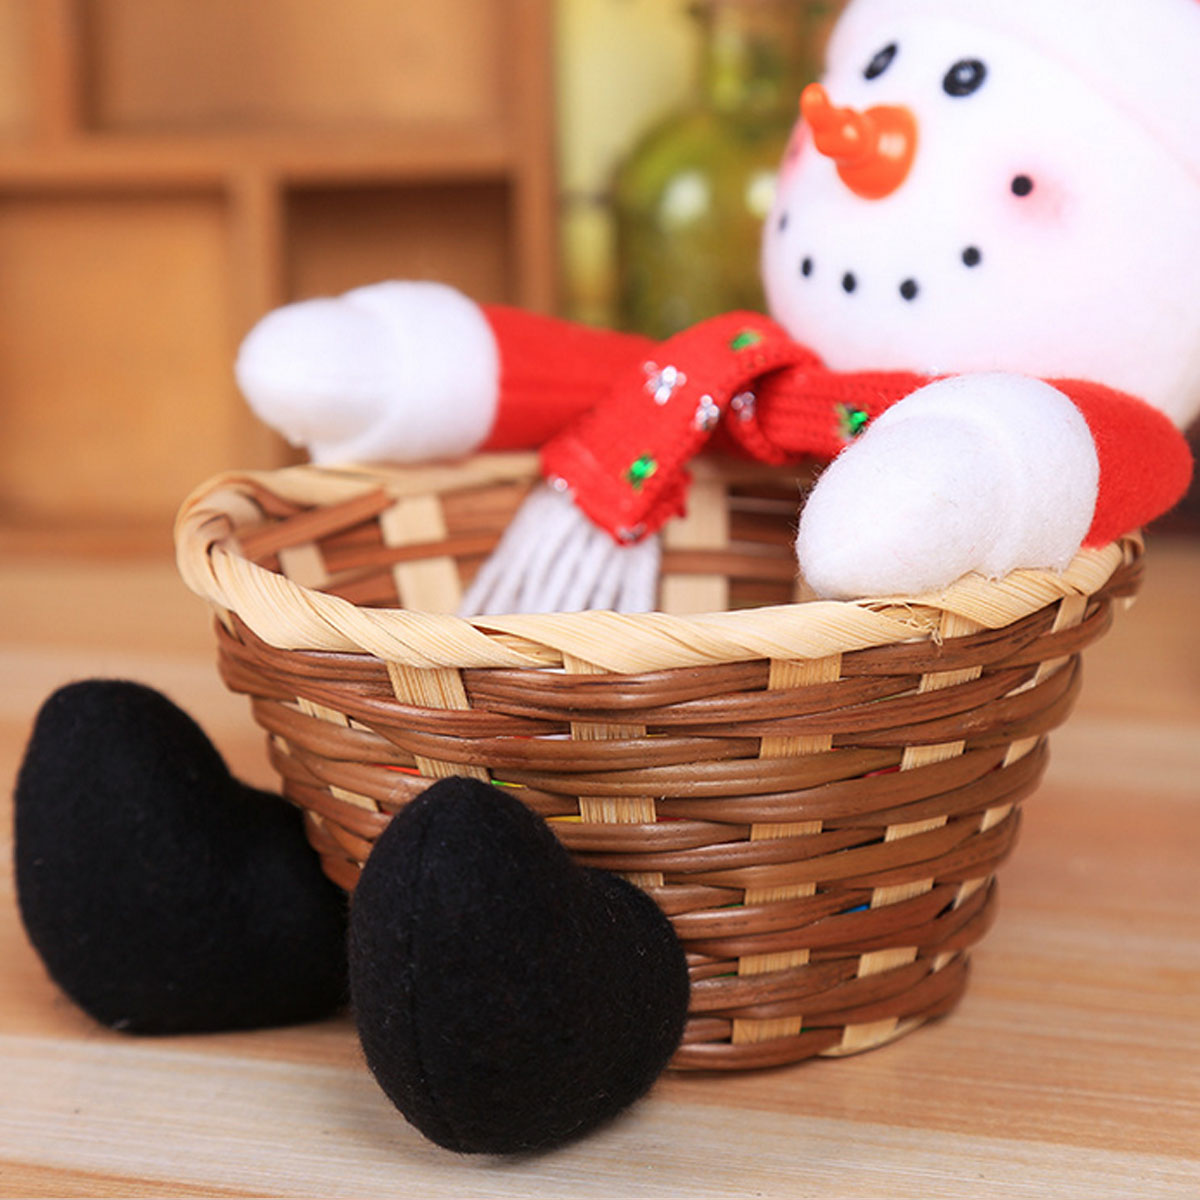 5-Types-Christmas-Candy-Storage-Basket-Santa-Claus-Home-Decorations-Ornaments-1477556-10